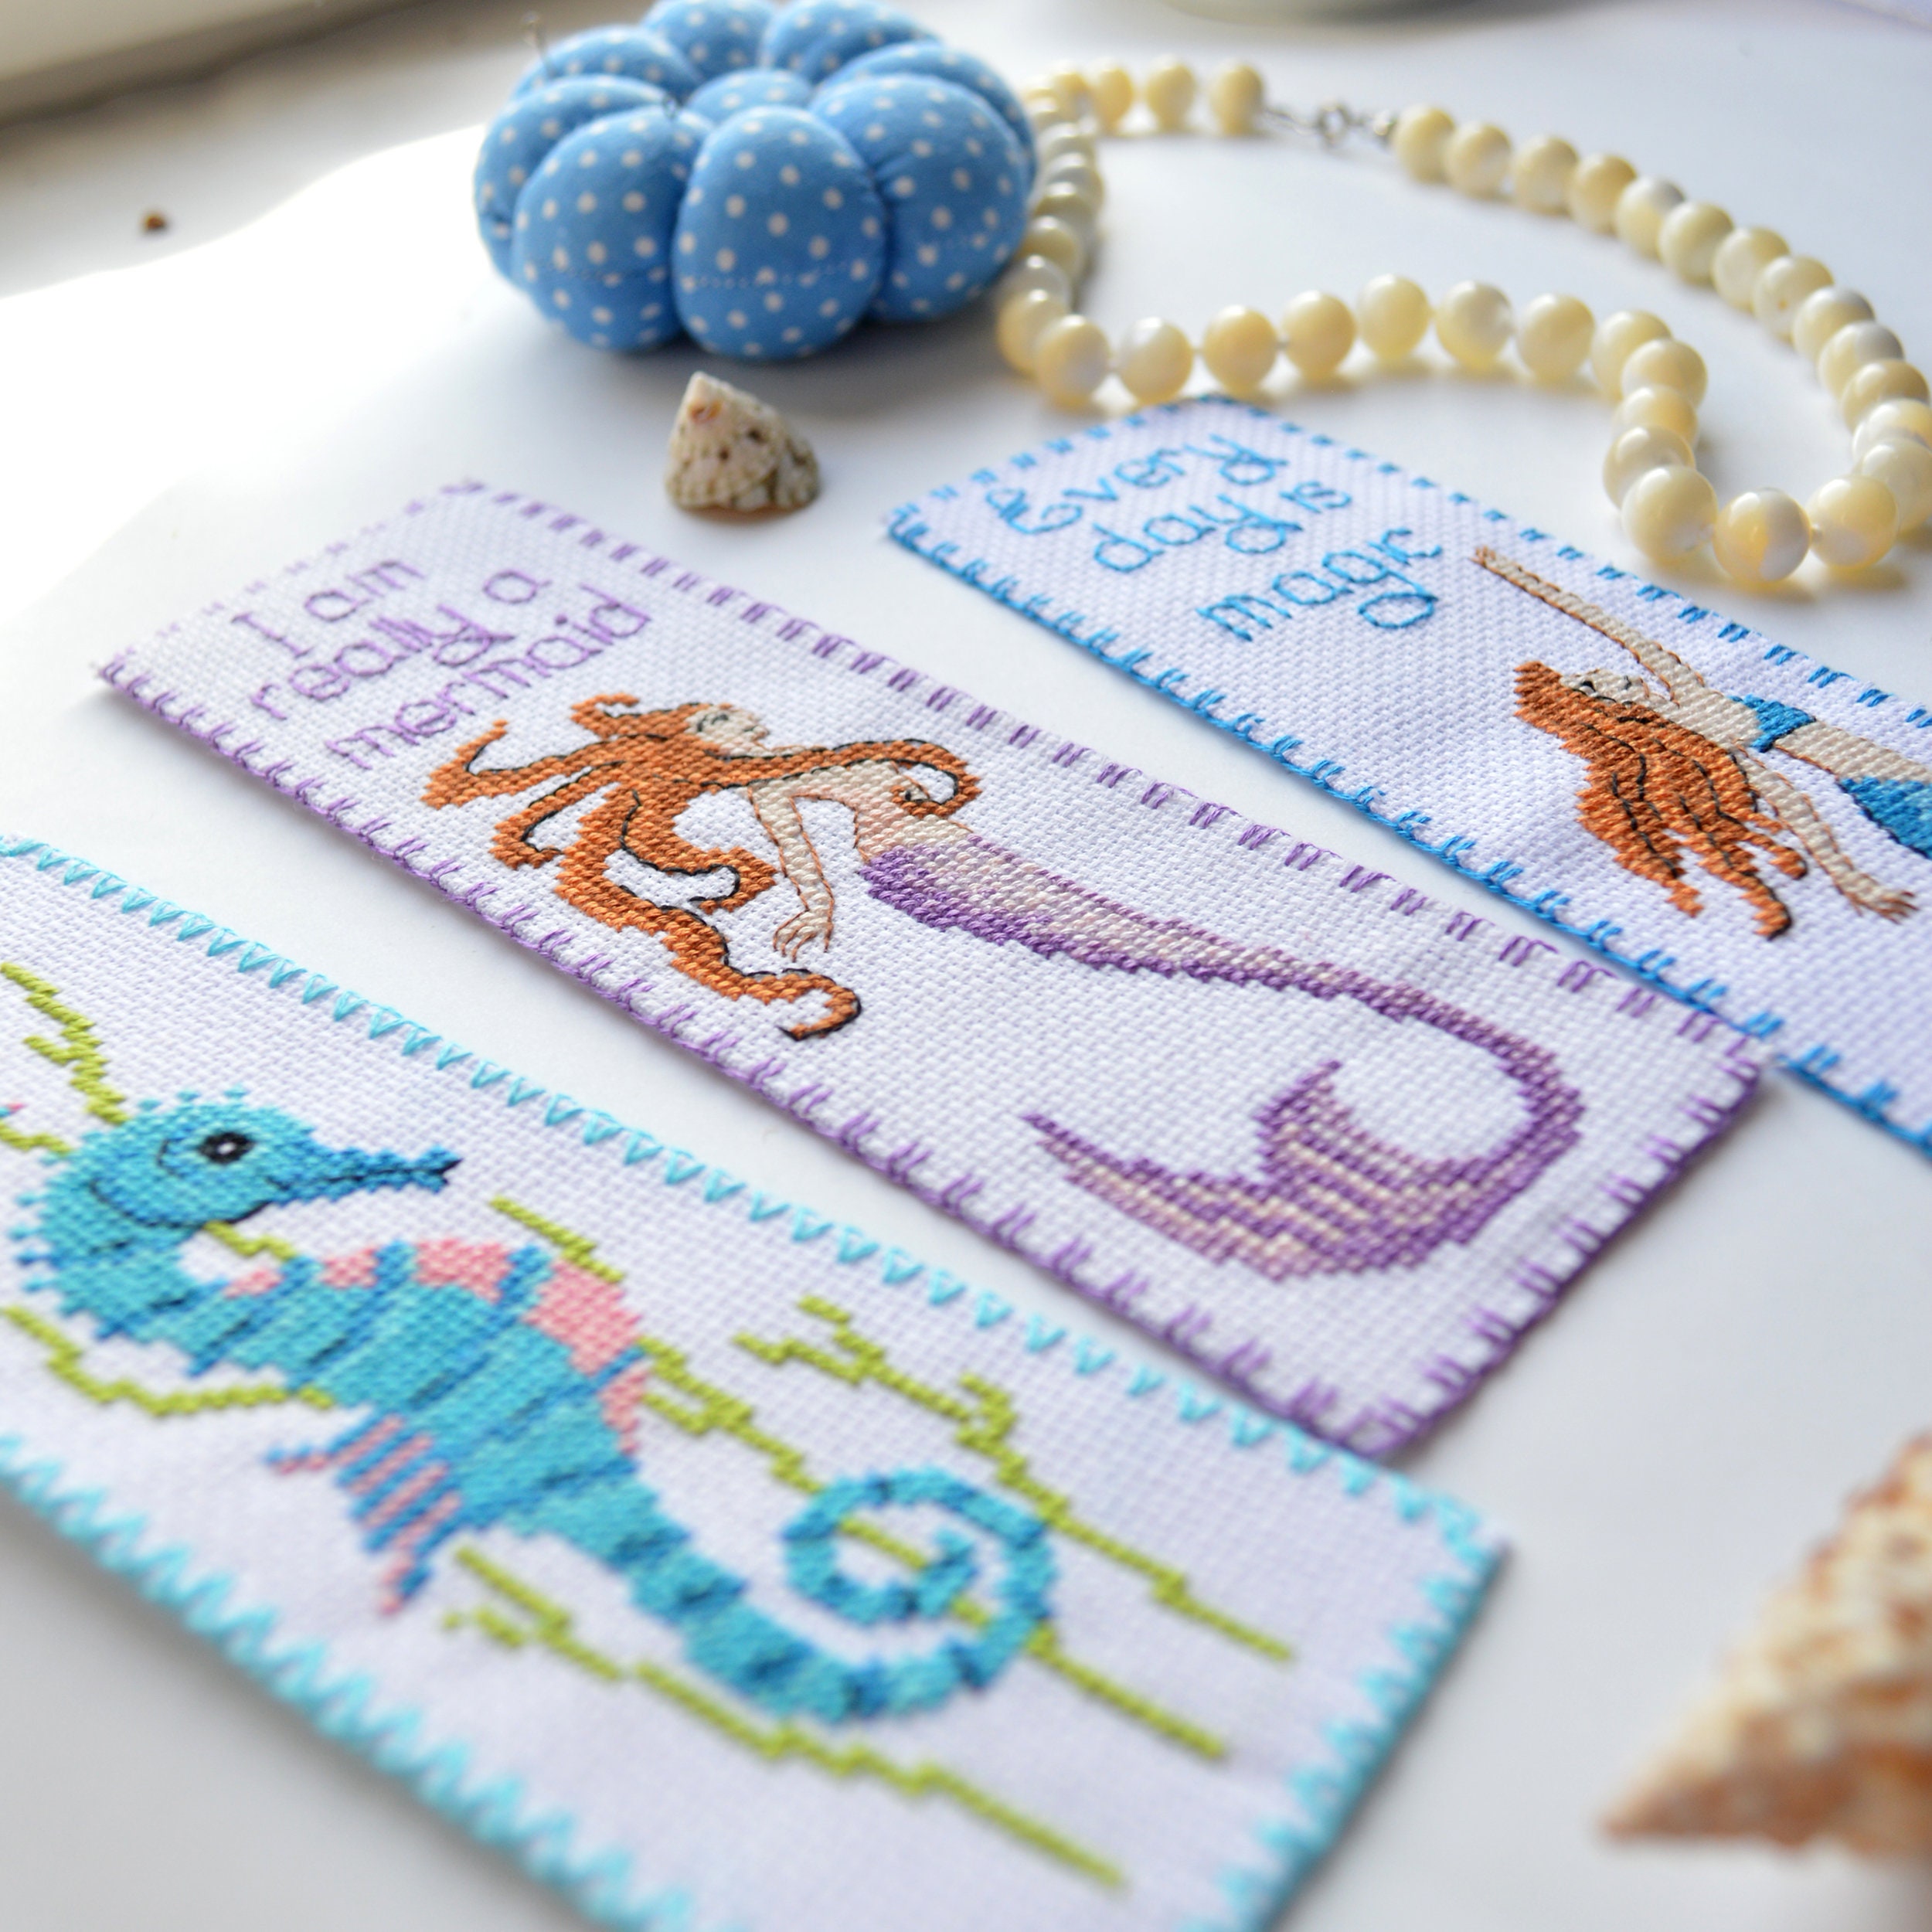 Seahorse Cross Stitch Bookmark Kit - Embroidery Set for DIY Book Marker